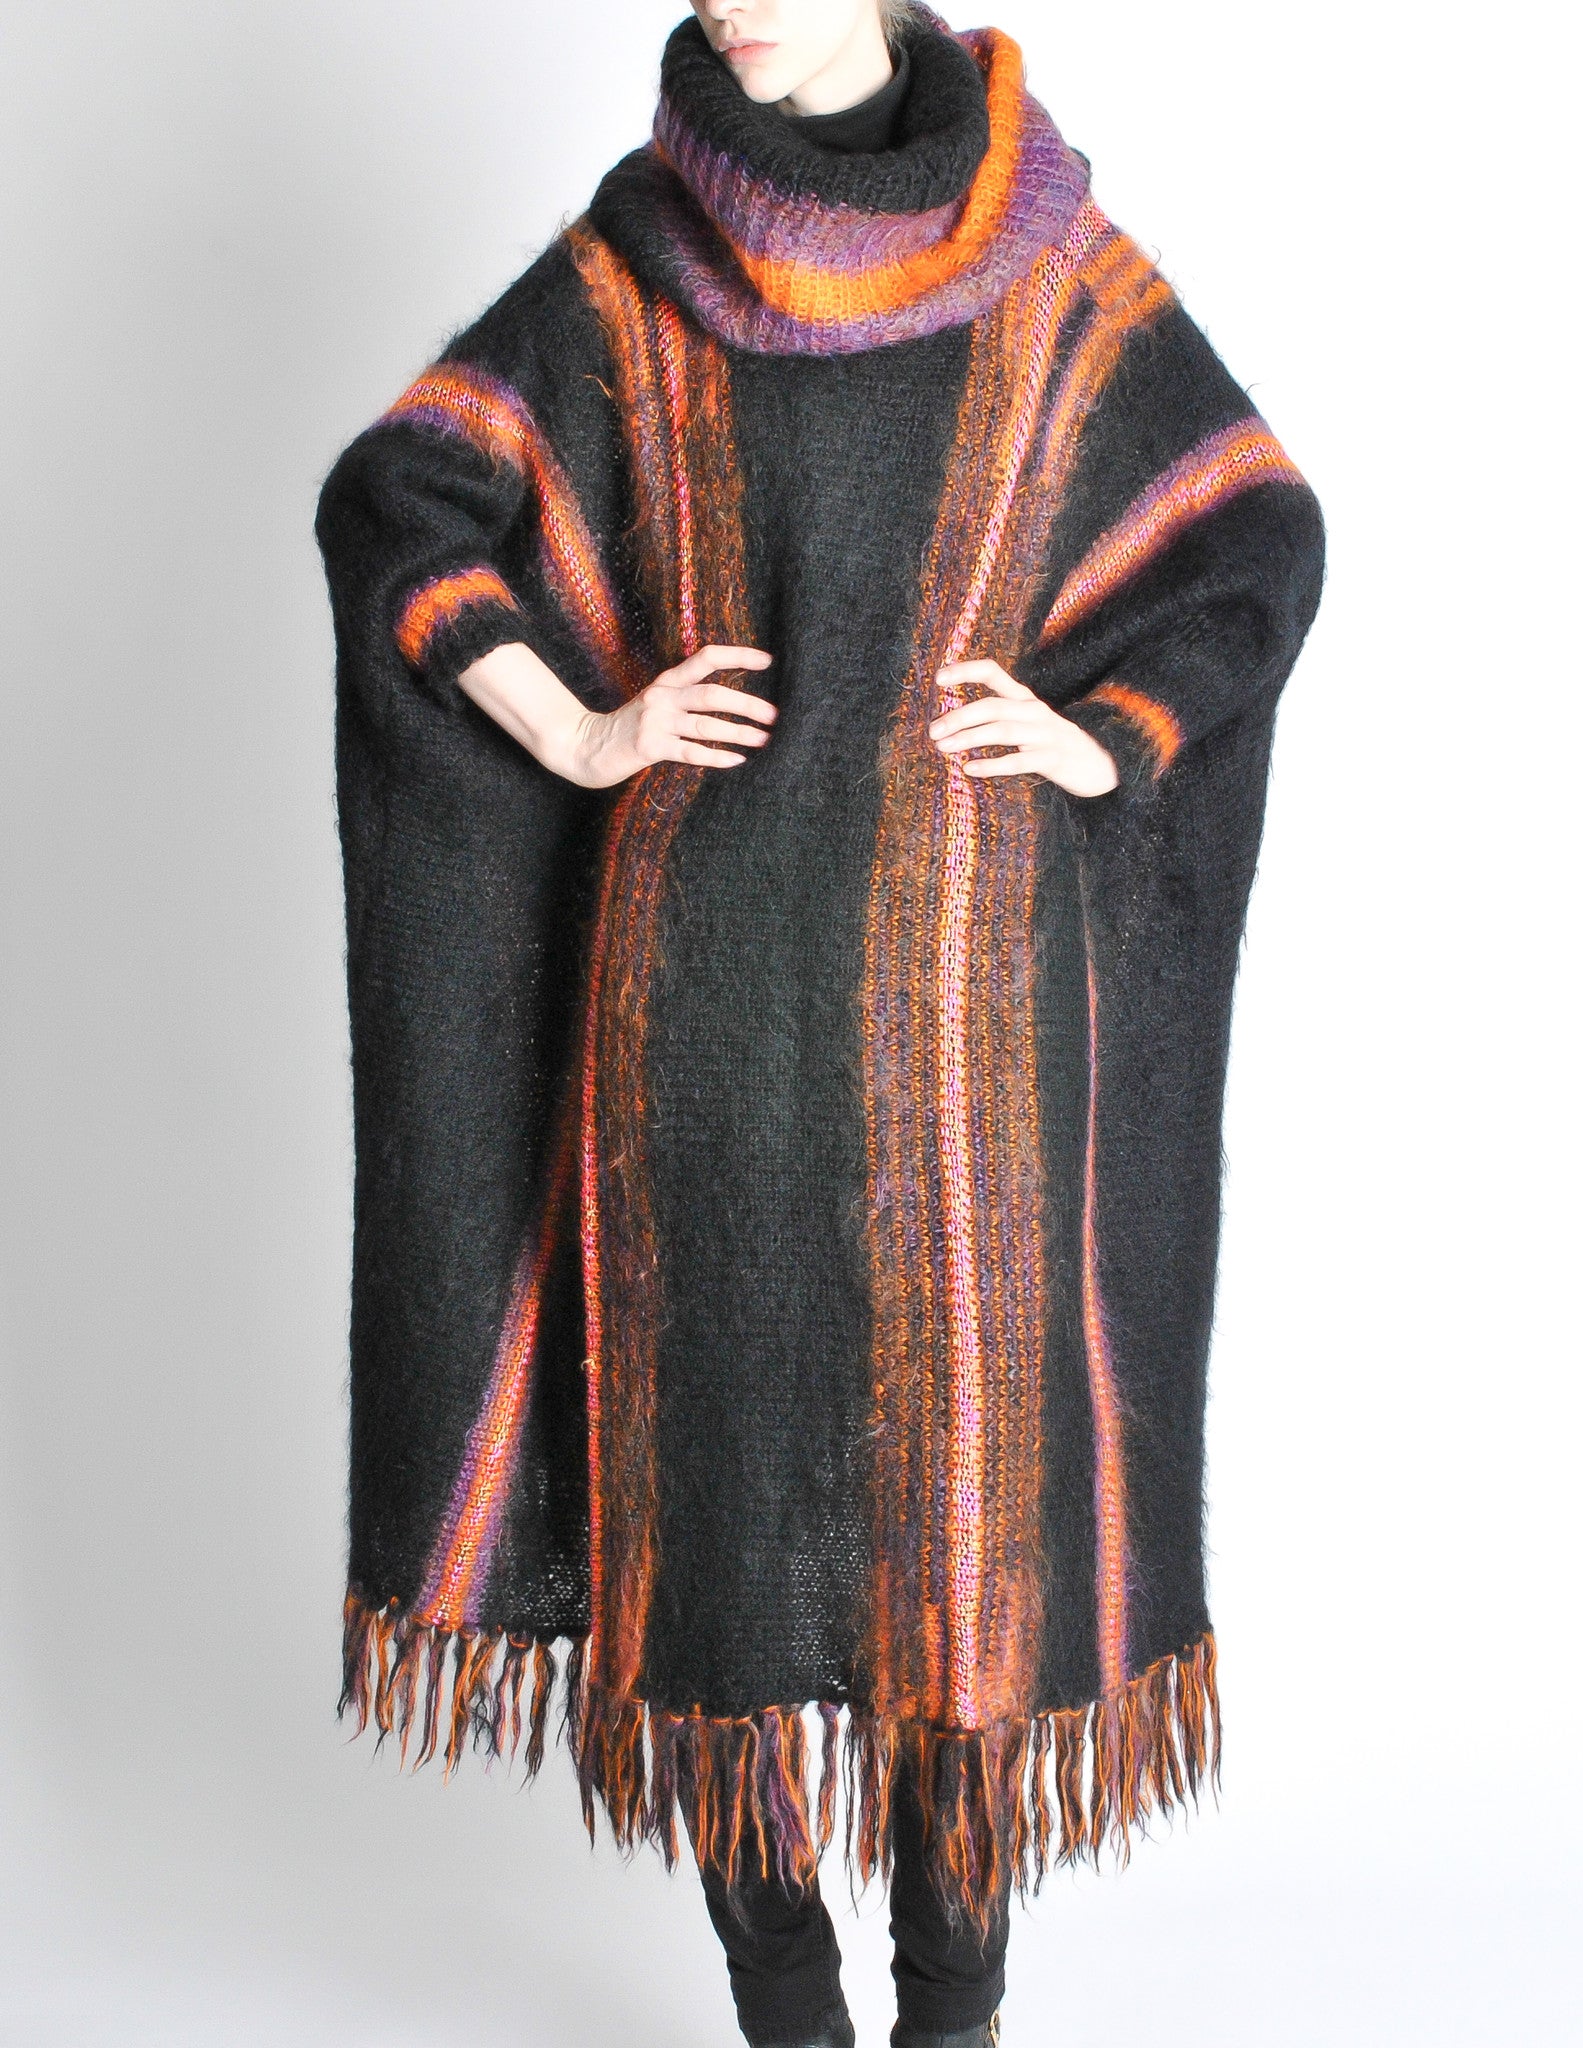 B. Altman & Co. Vintage Striped Knit Mohair Poncho - from Amarcord ...